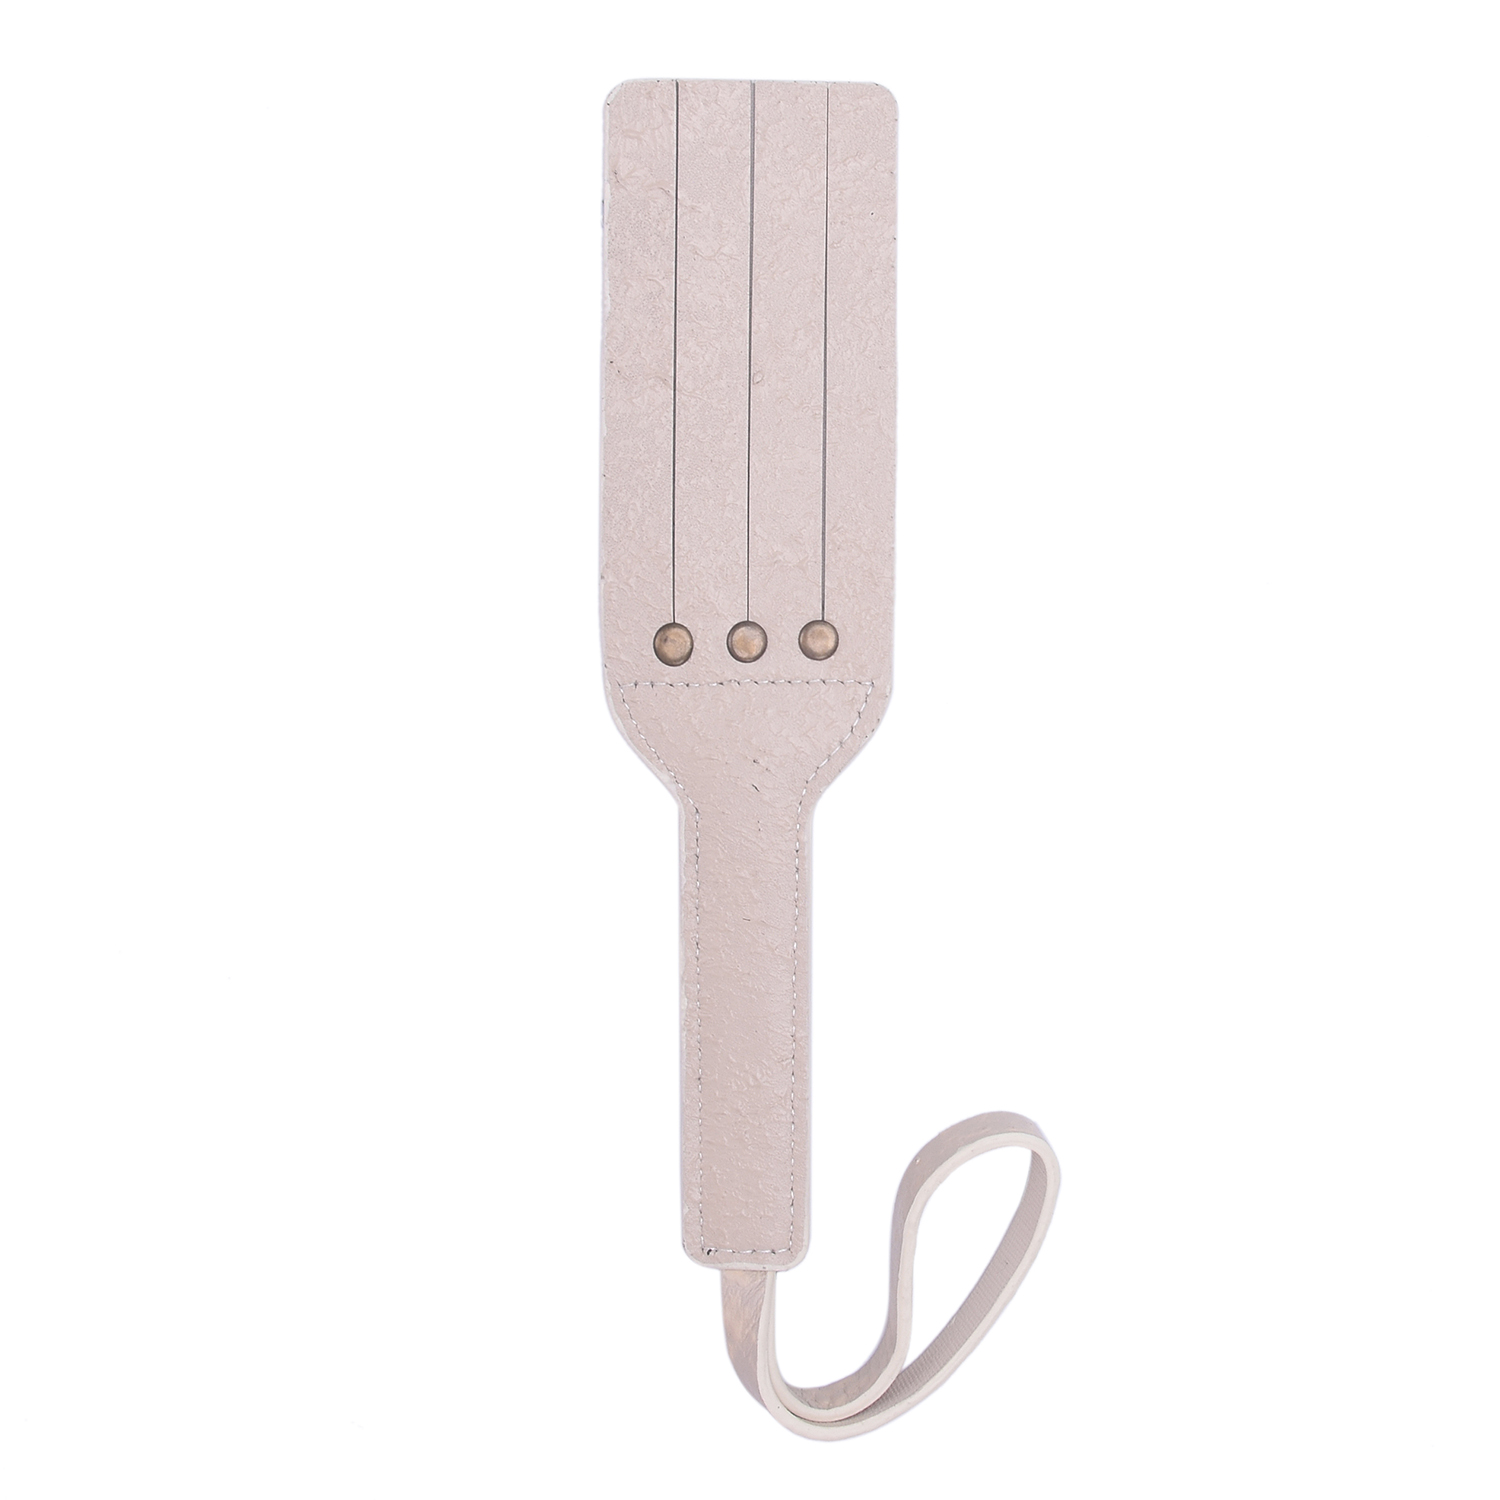 Exquistite Leather Spanking Paddle